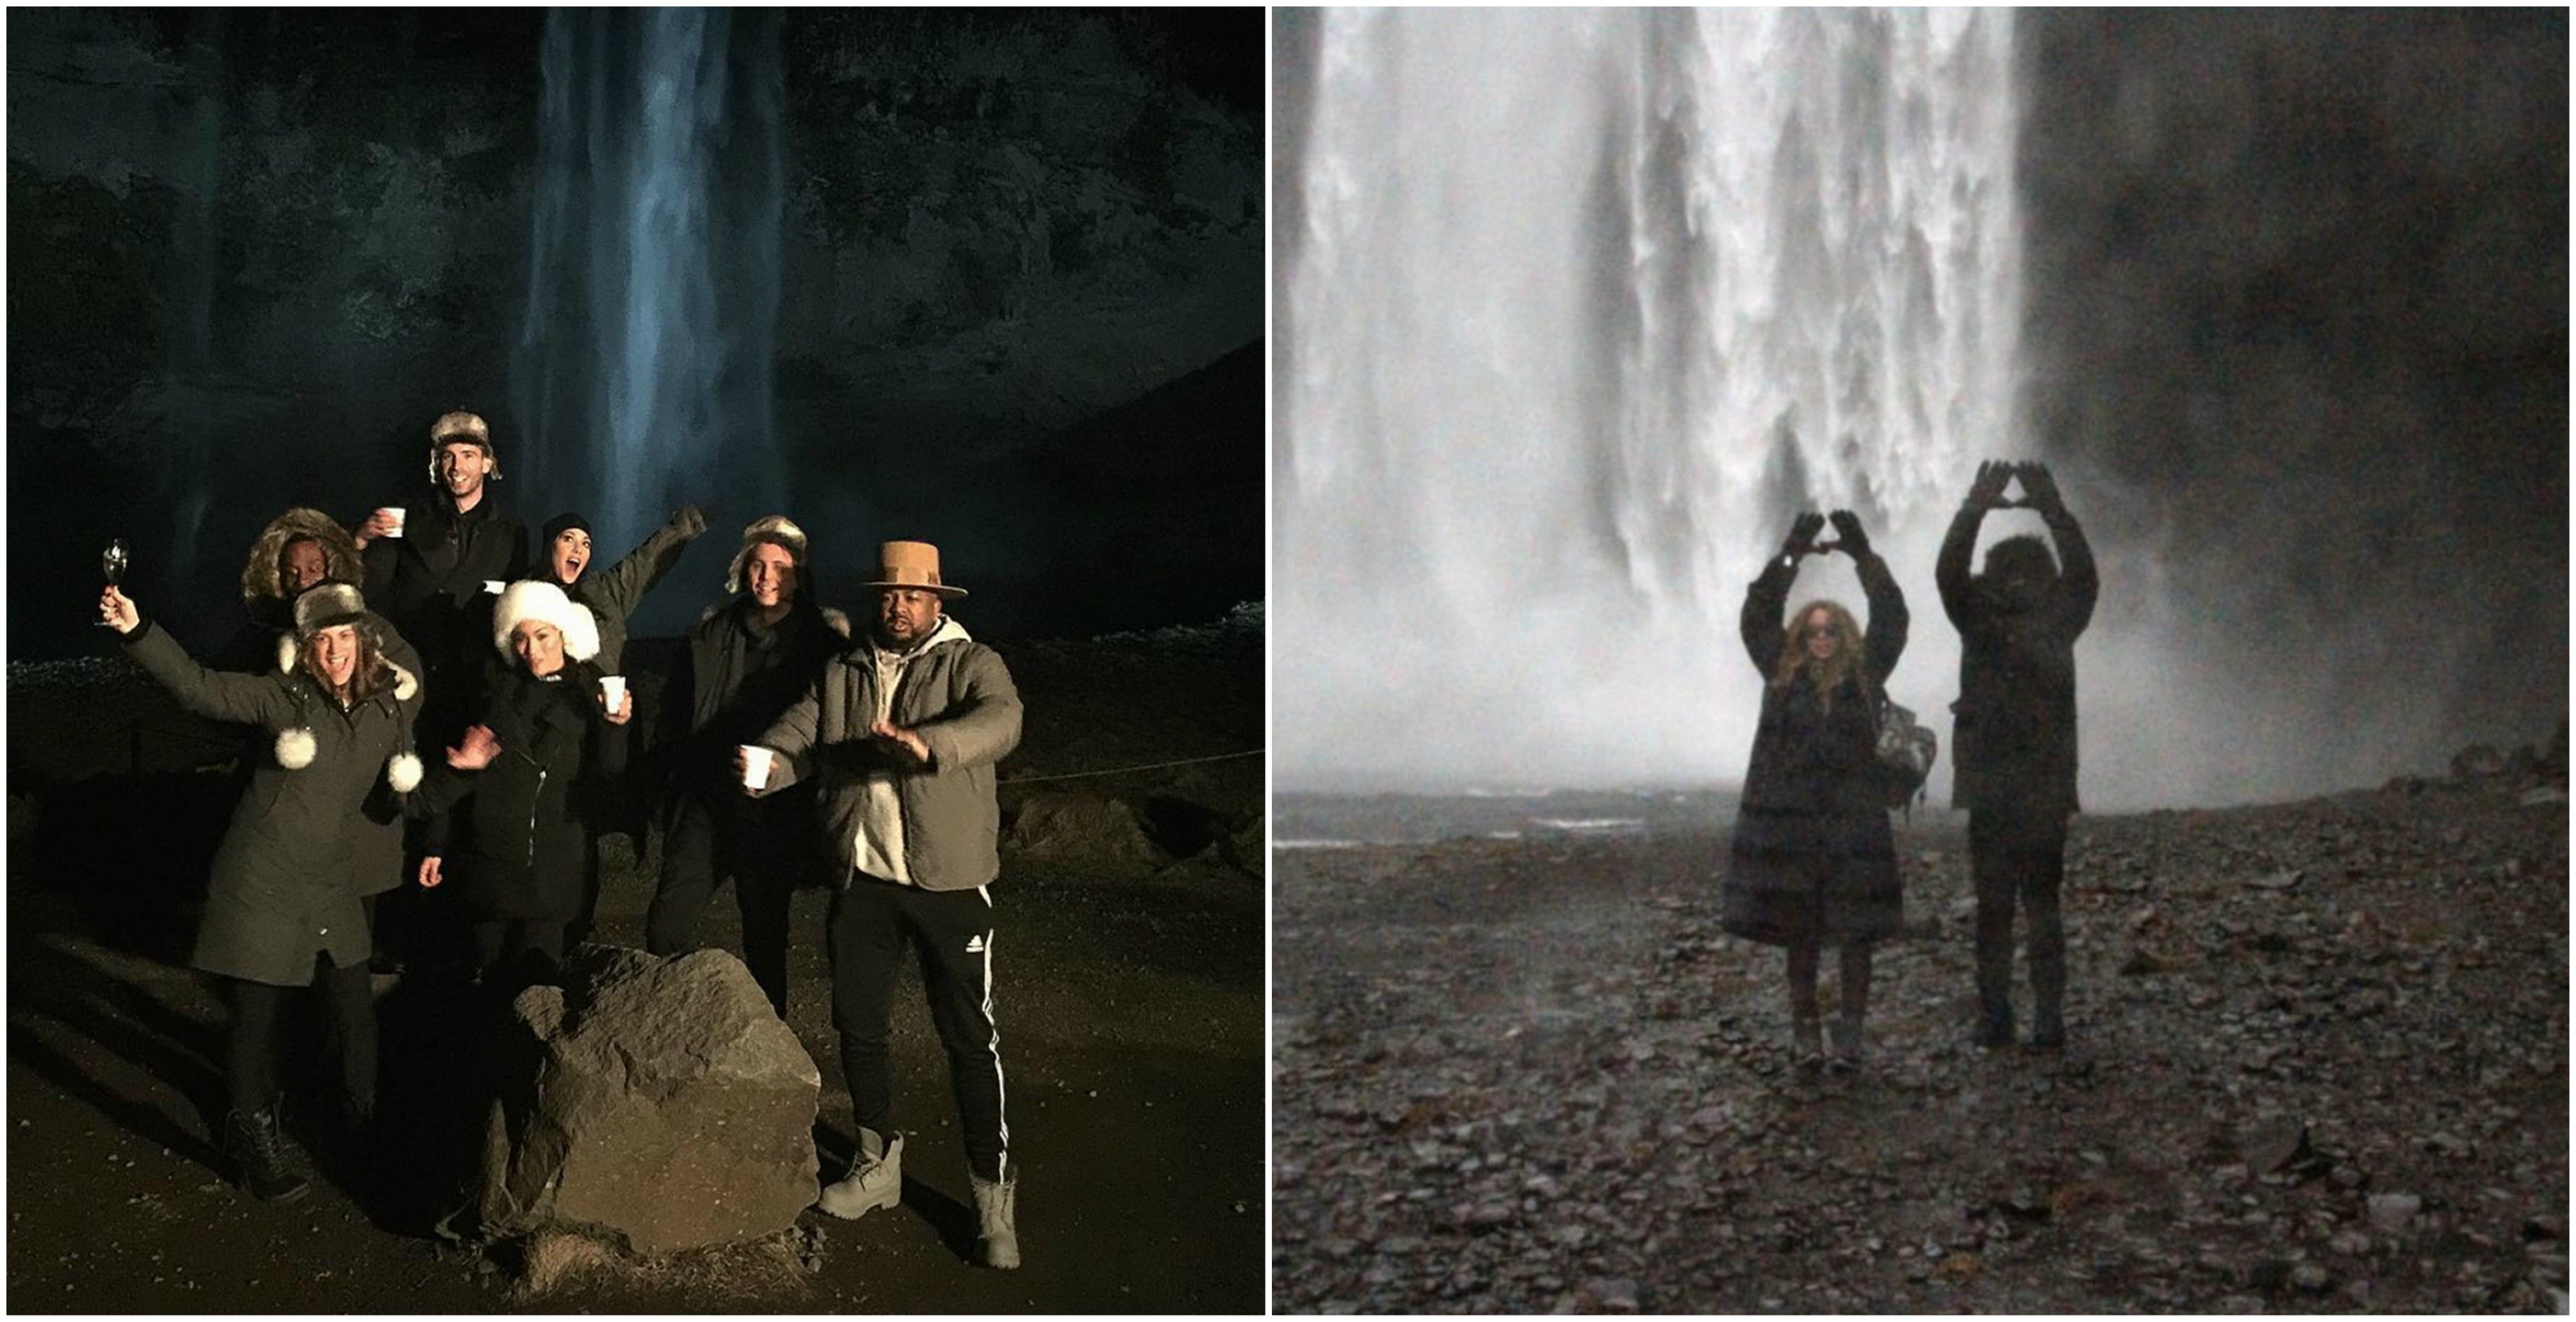 The Kardashians and Beyonce on the river waterfall in Iceland